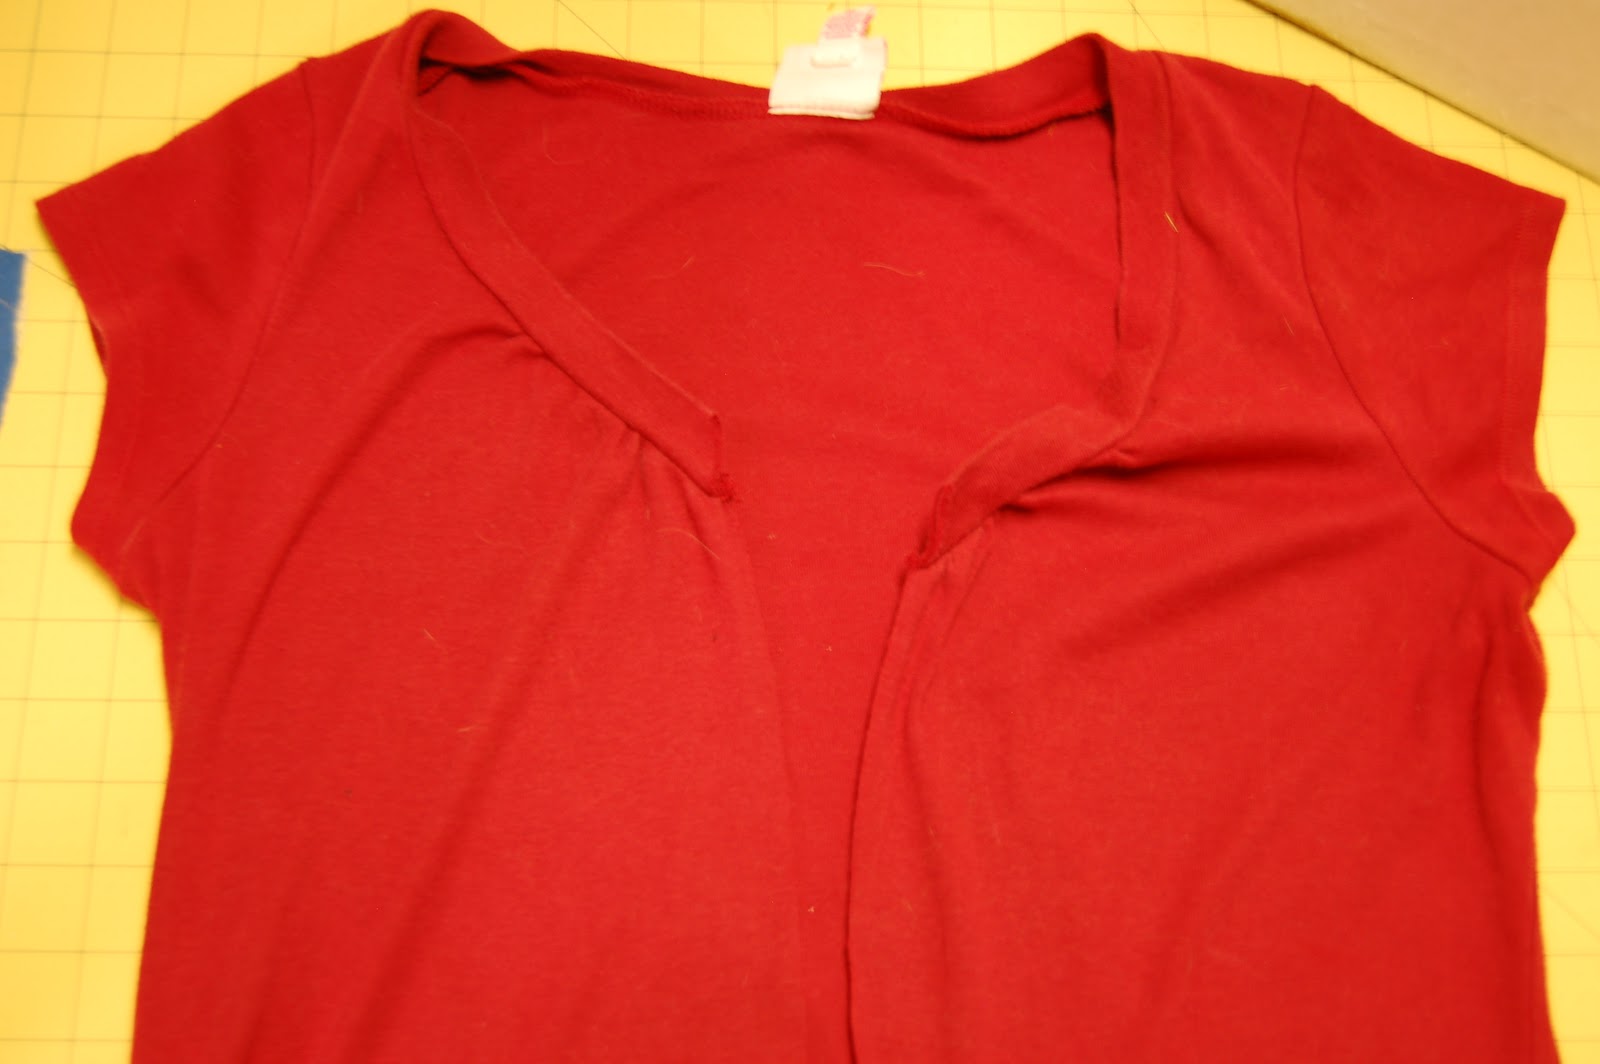 Diana's Sweet Things: Tutorial: Refashion a T-shirt with a Ruffle Front